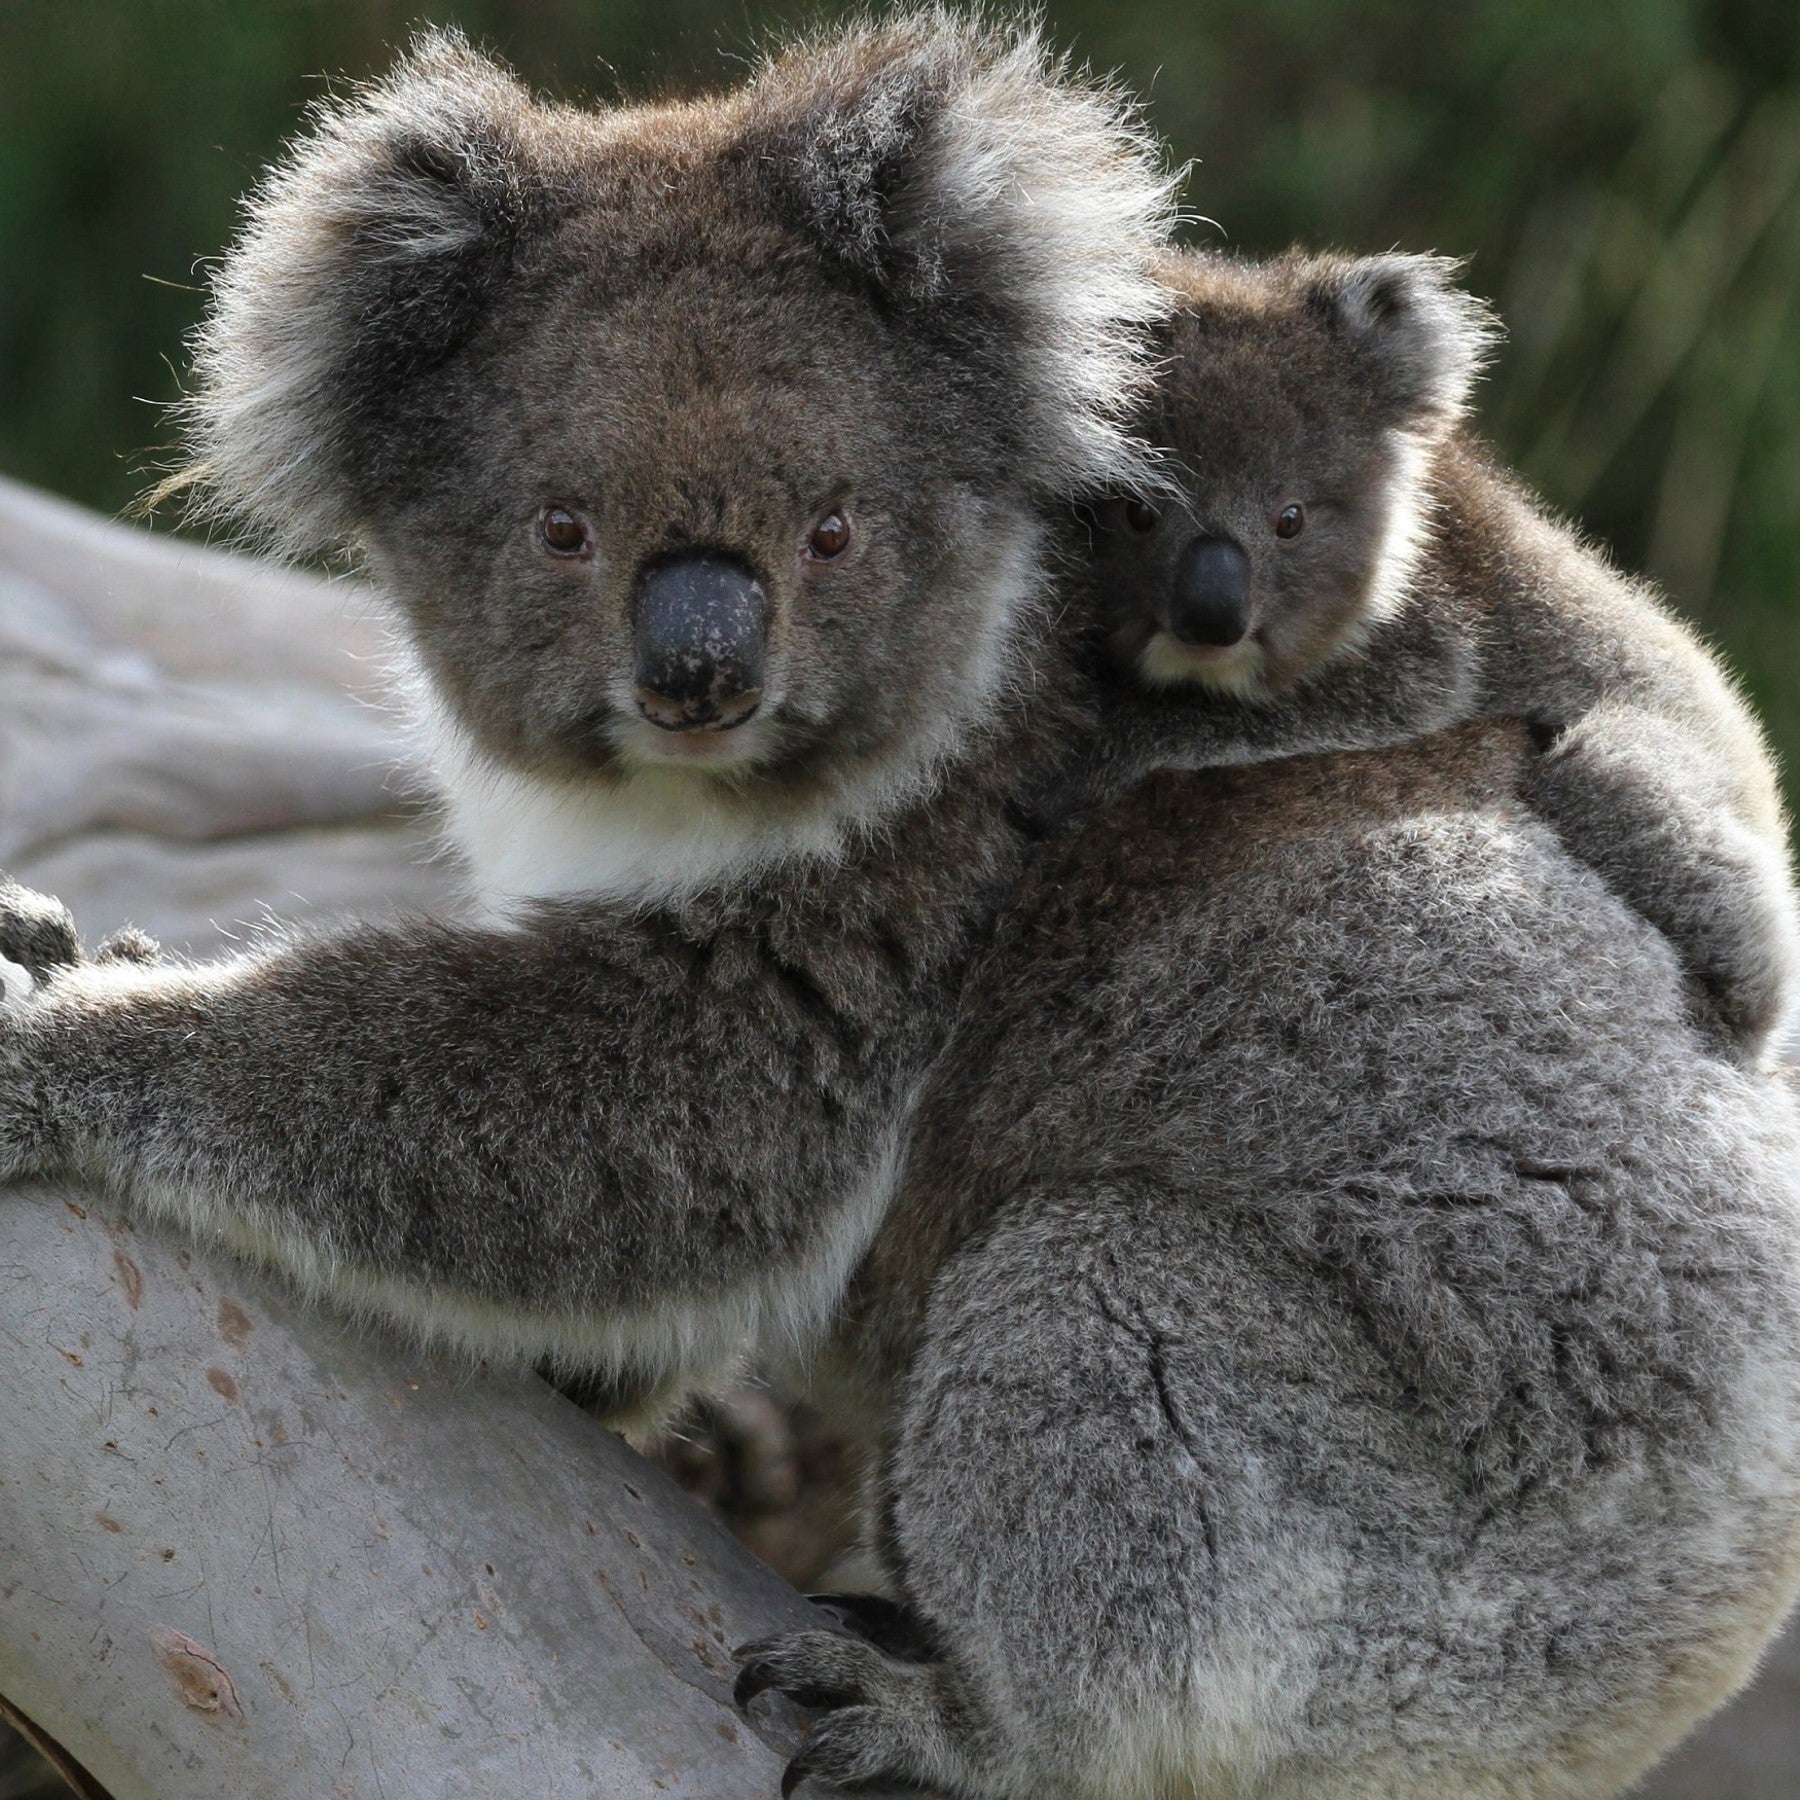 A picture of a mother koala with her joey on her back